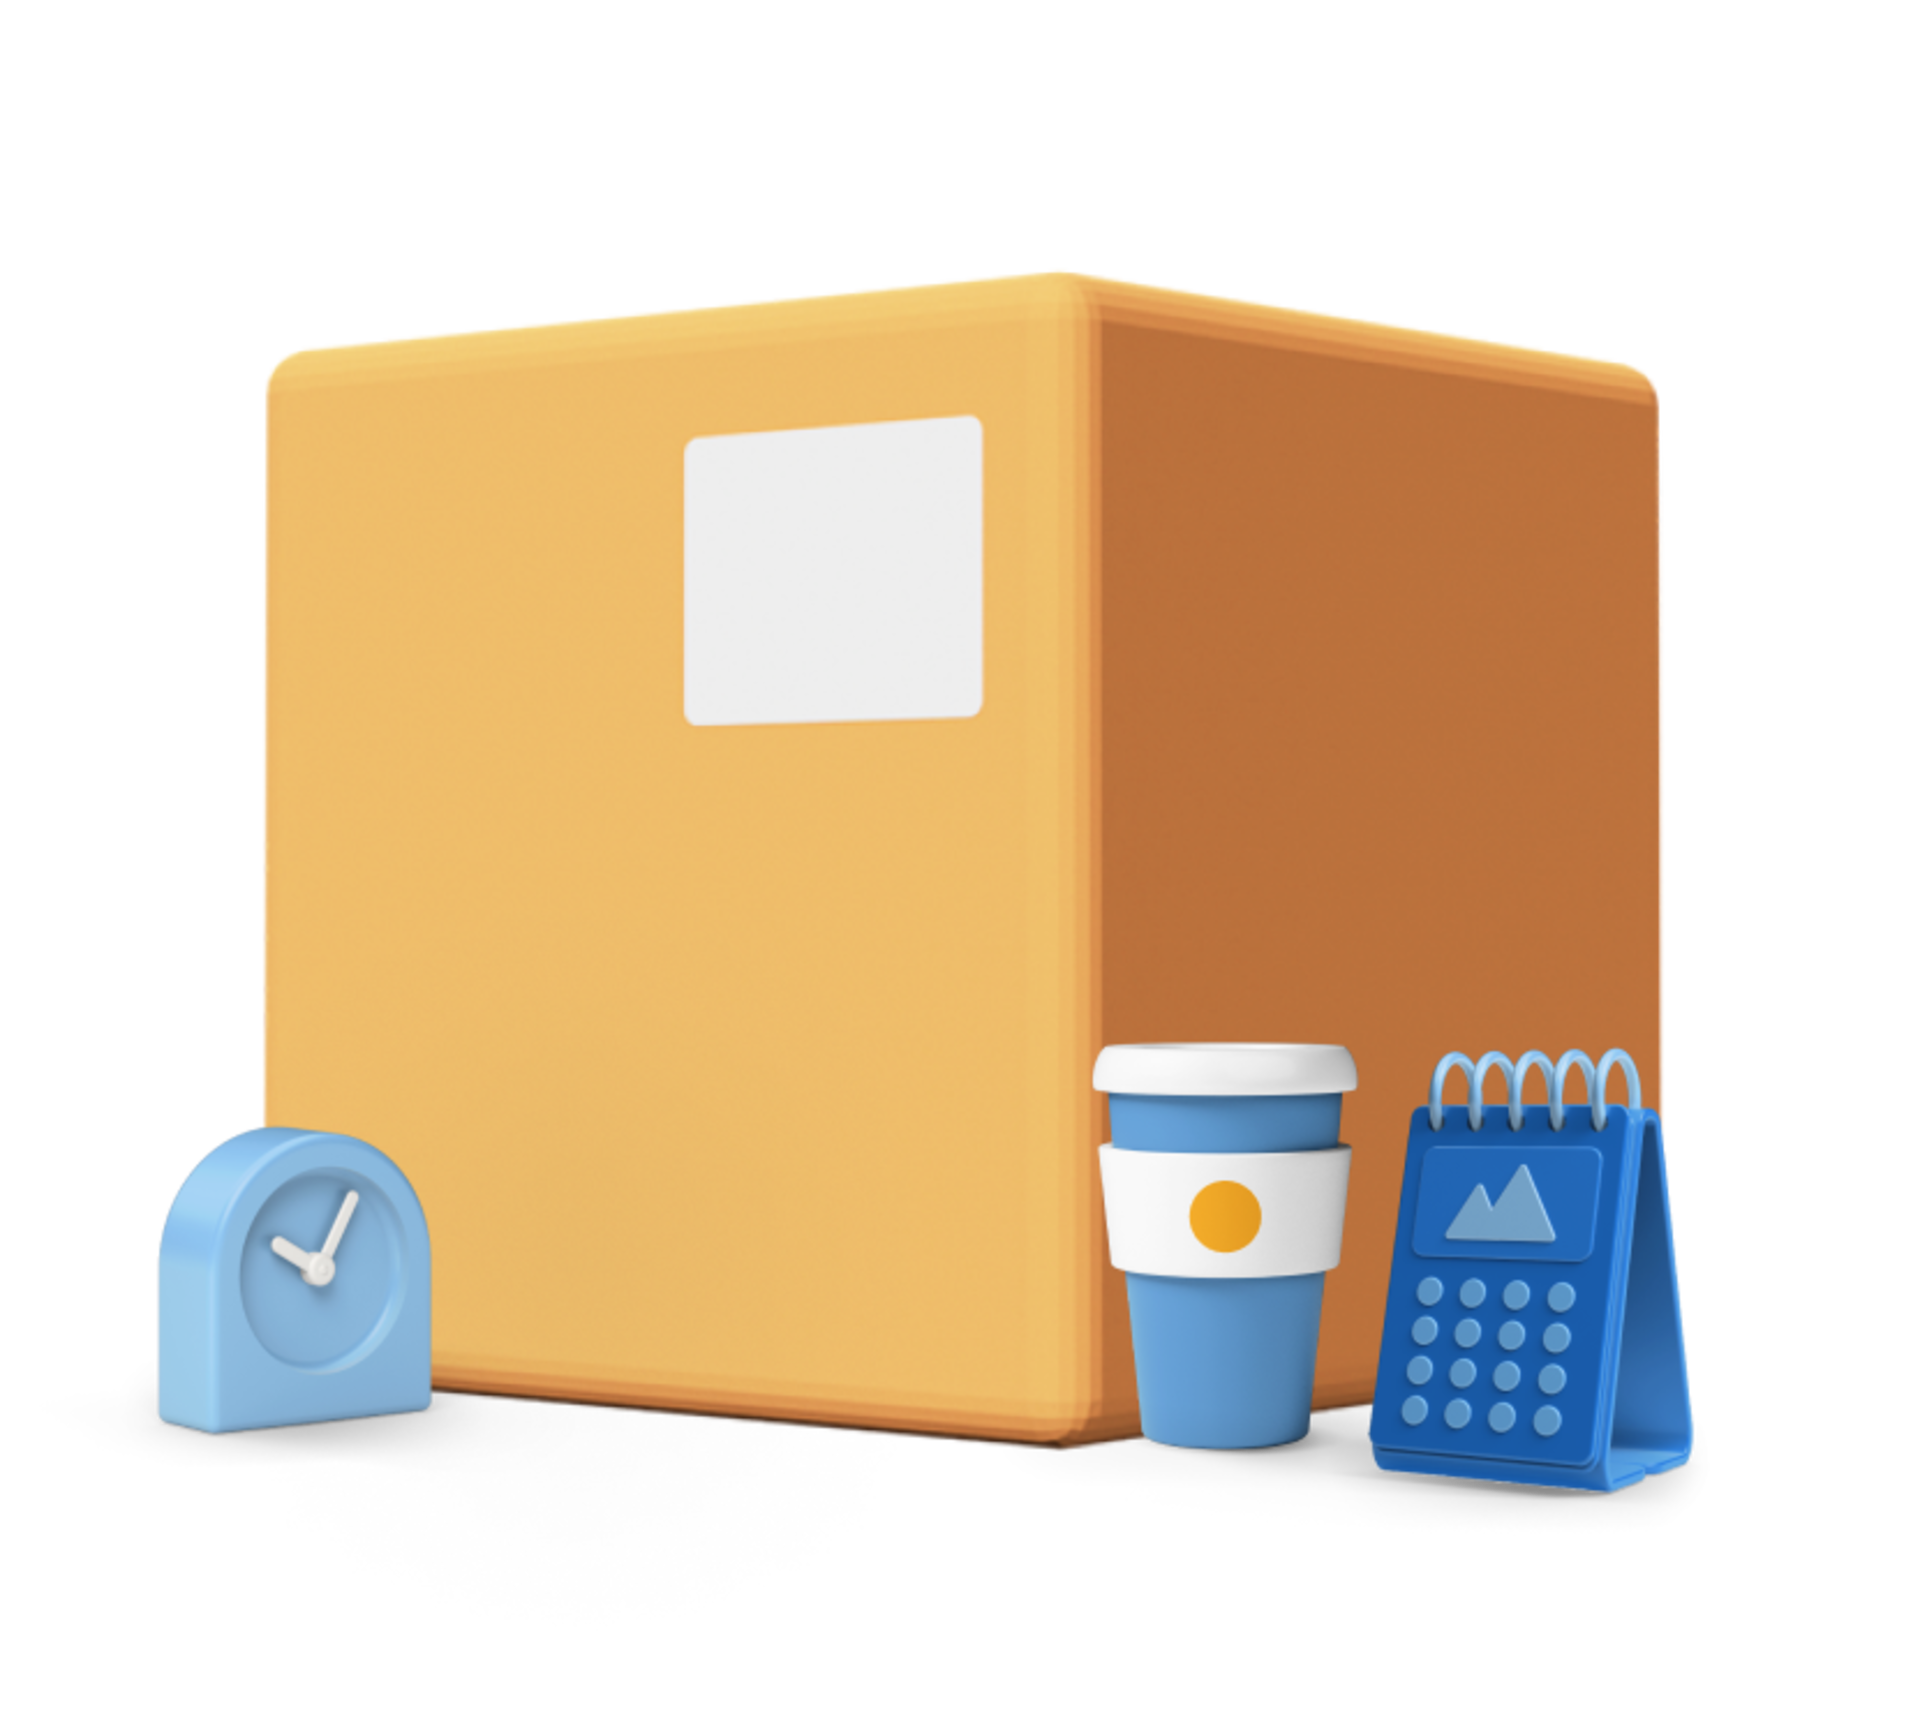 Large box with animated icons